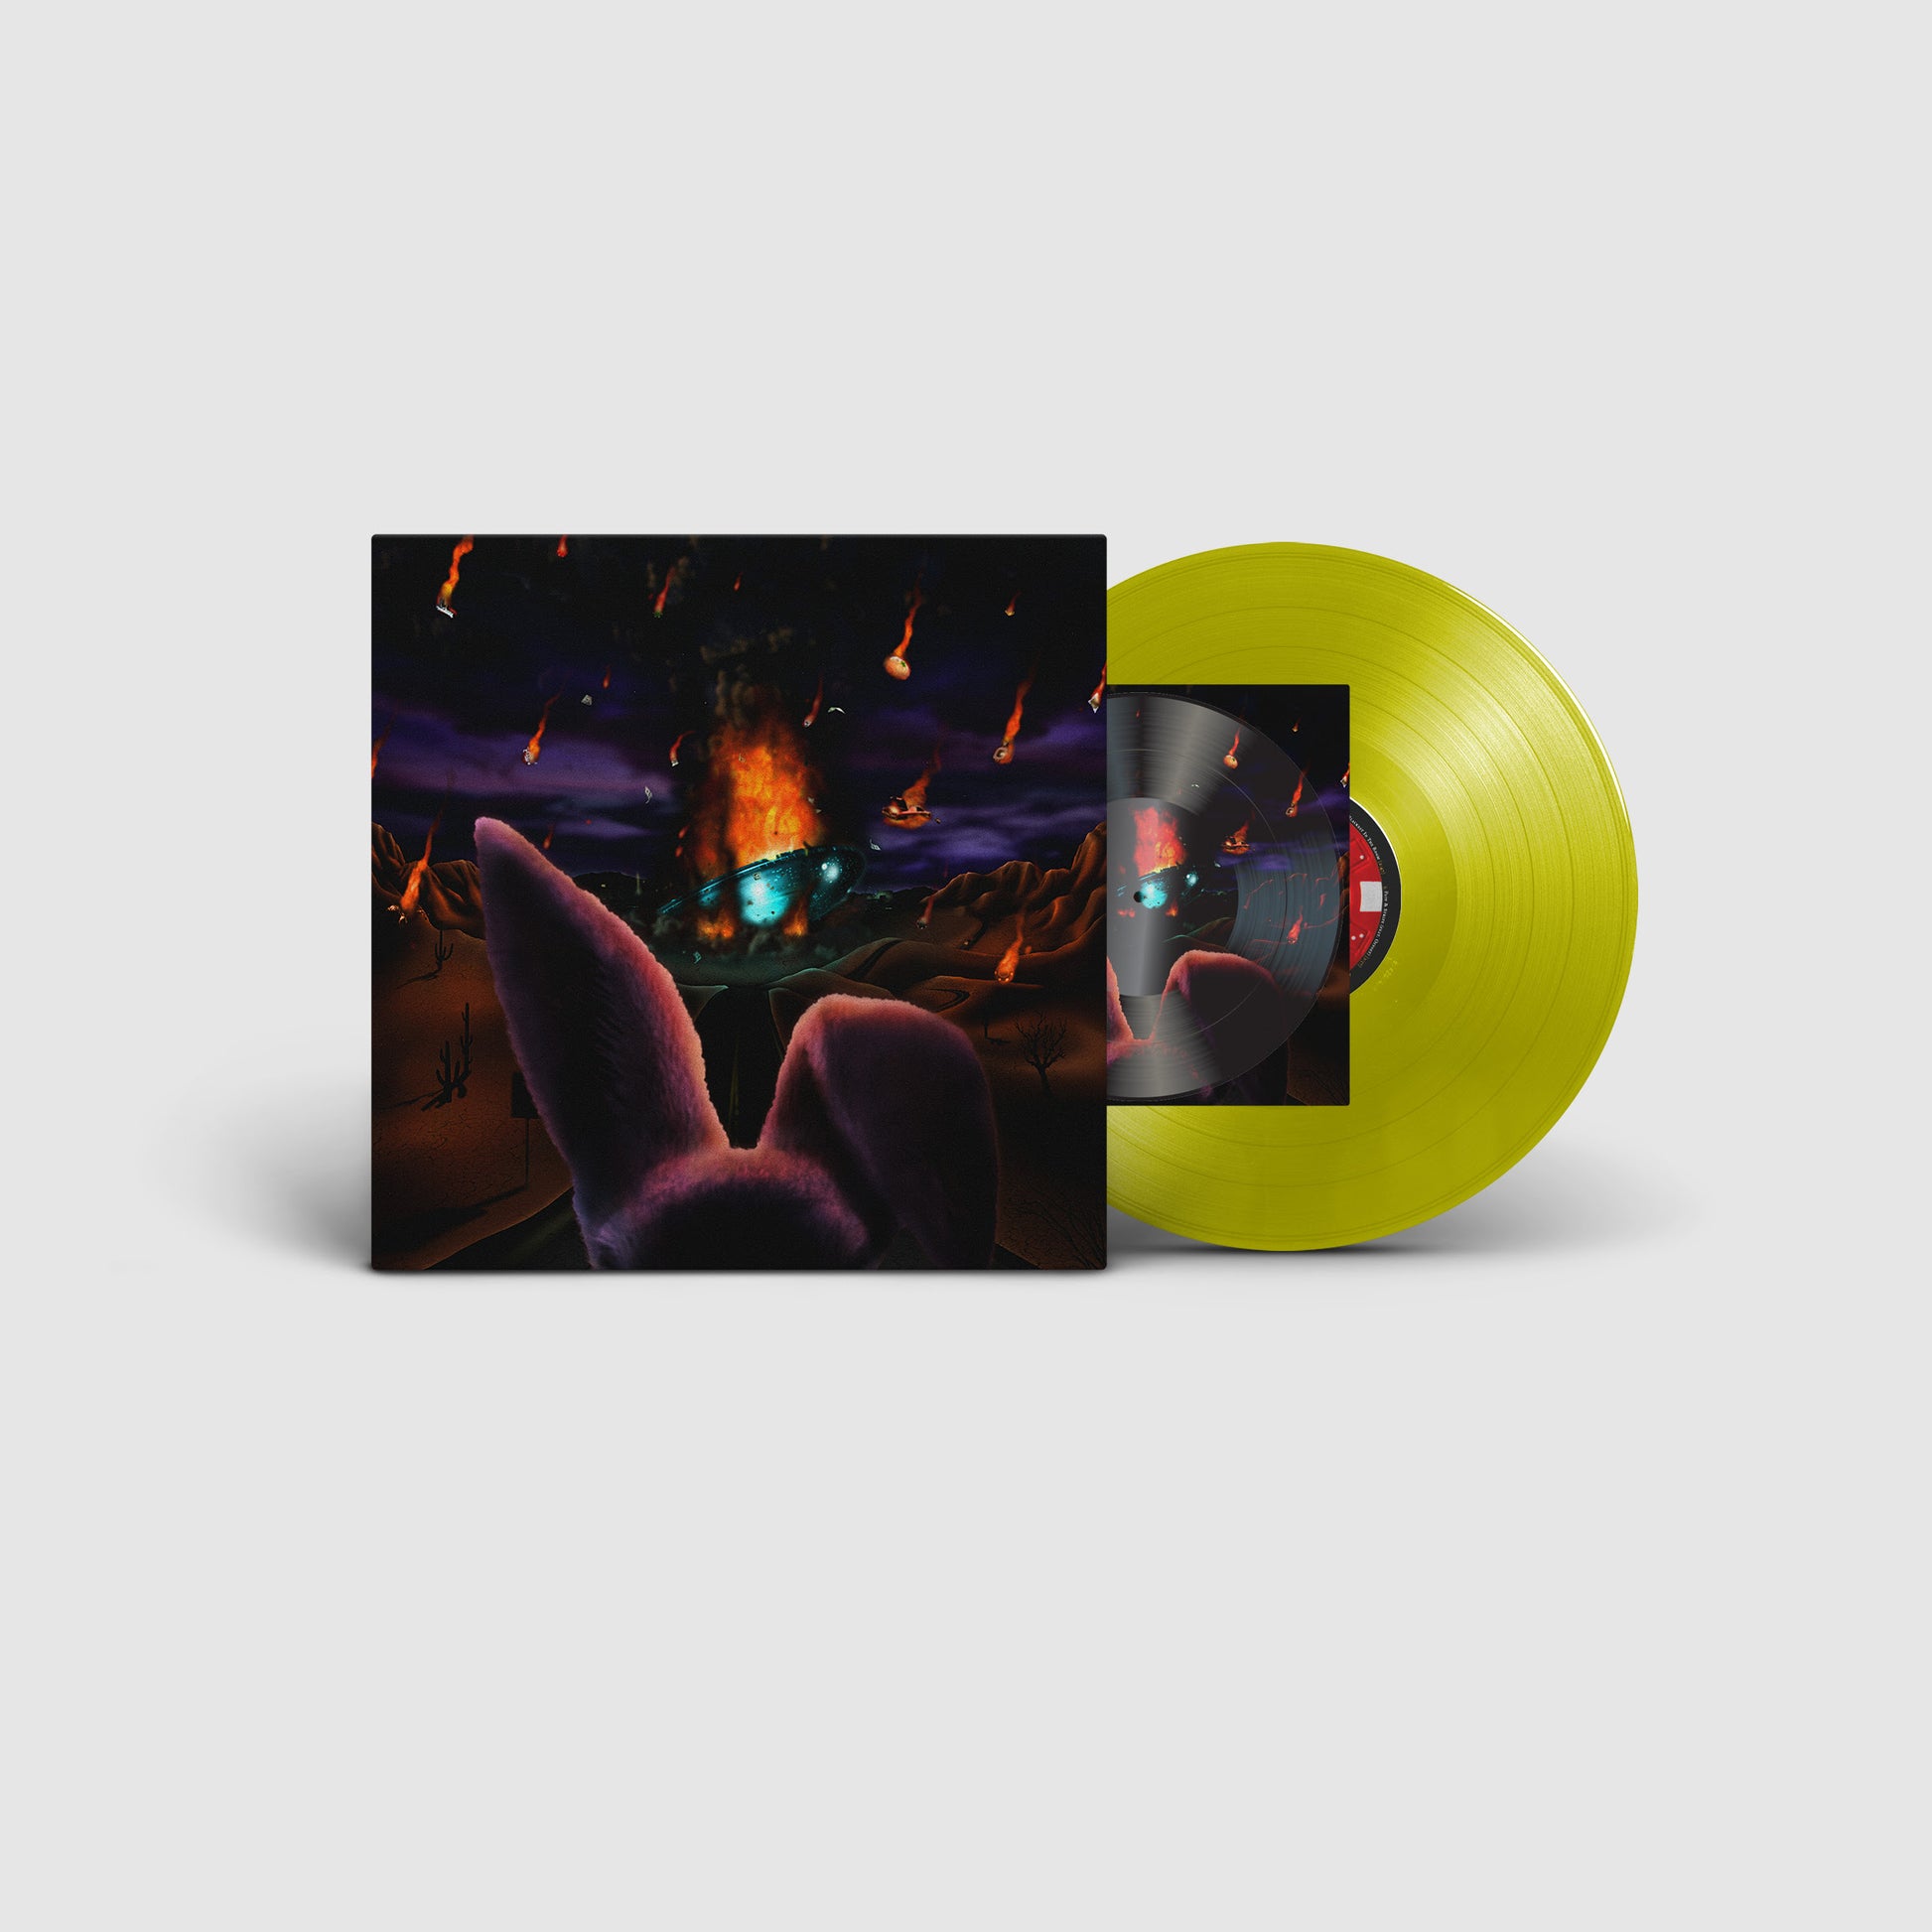 Freddie Gibbs - $oul $old $eparately (Indie Exclusive, Neon Yellow, includes flexi disc with one extra track) (Vinyl) - Joco Records